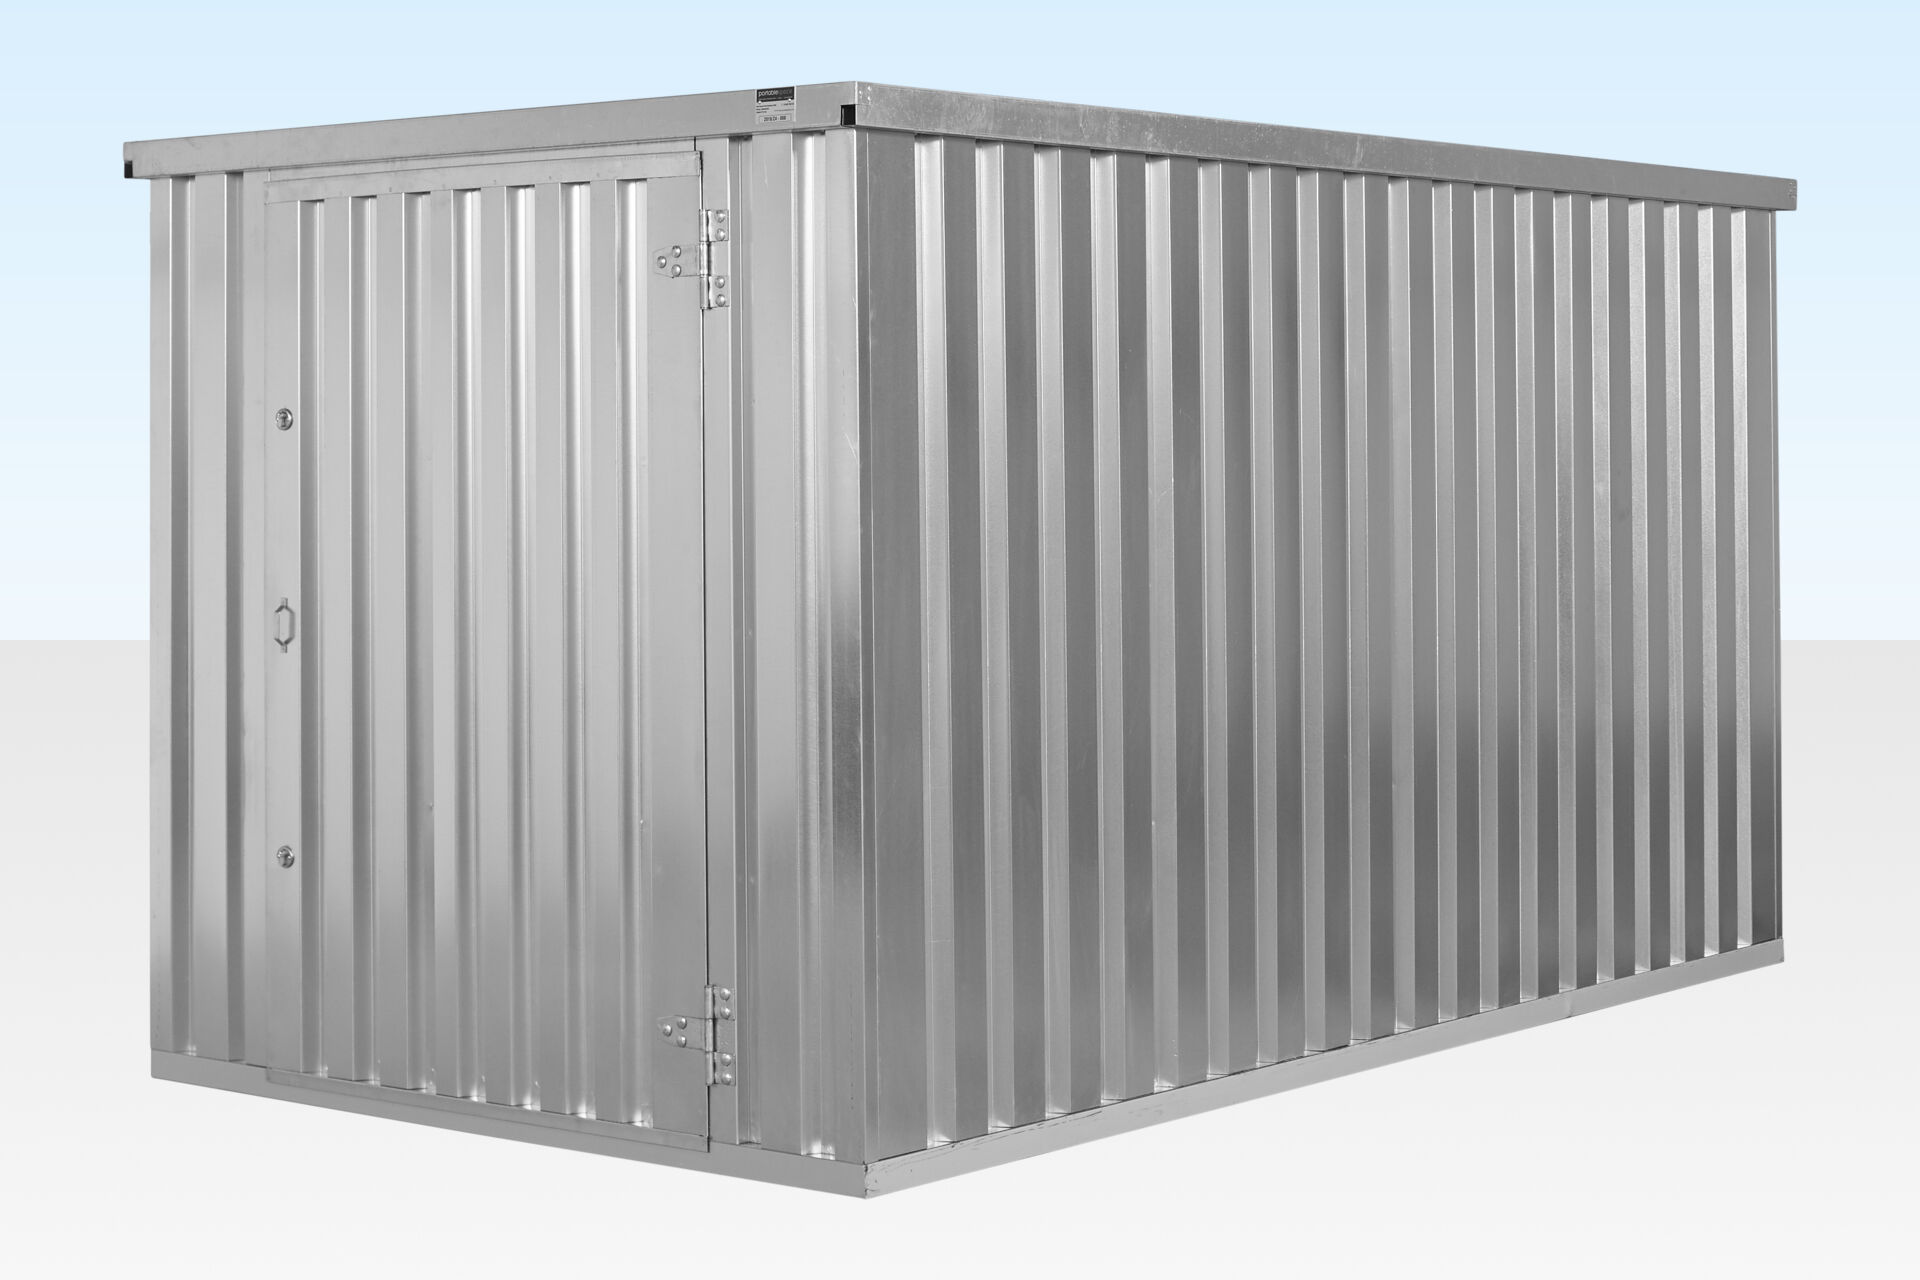 BUY 4M X 2.1M FLAT PACK CONTAINER STORE – GALVANISED AT WWW.HELLOCONTAINERS.COM